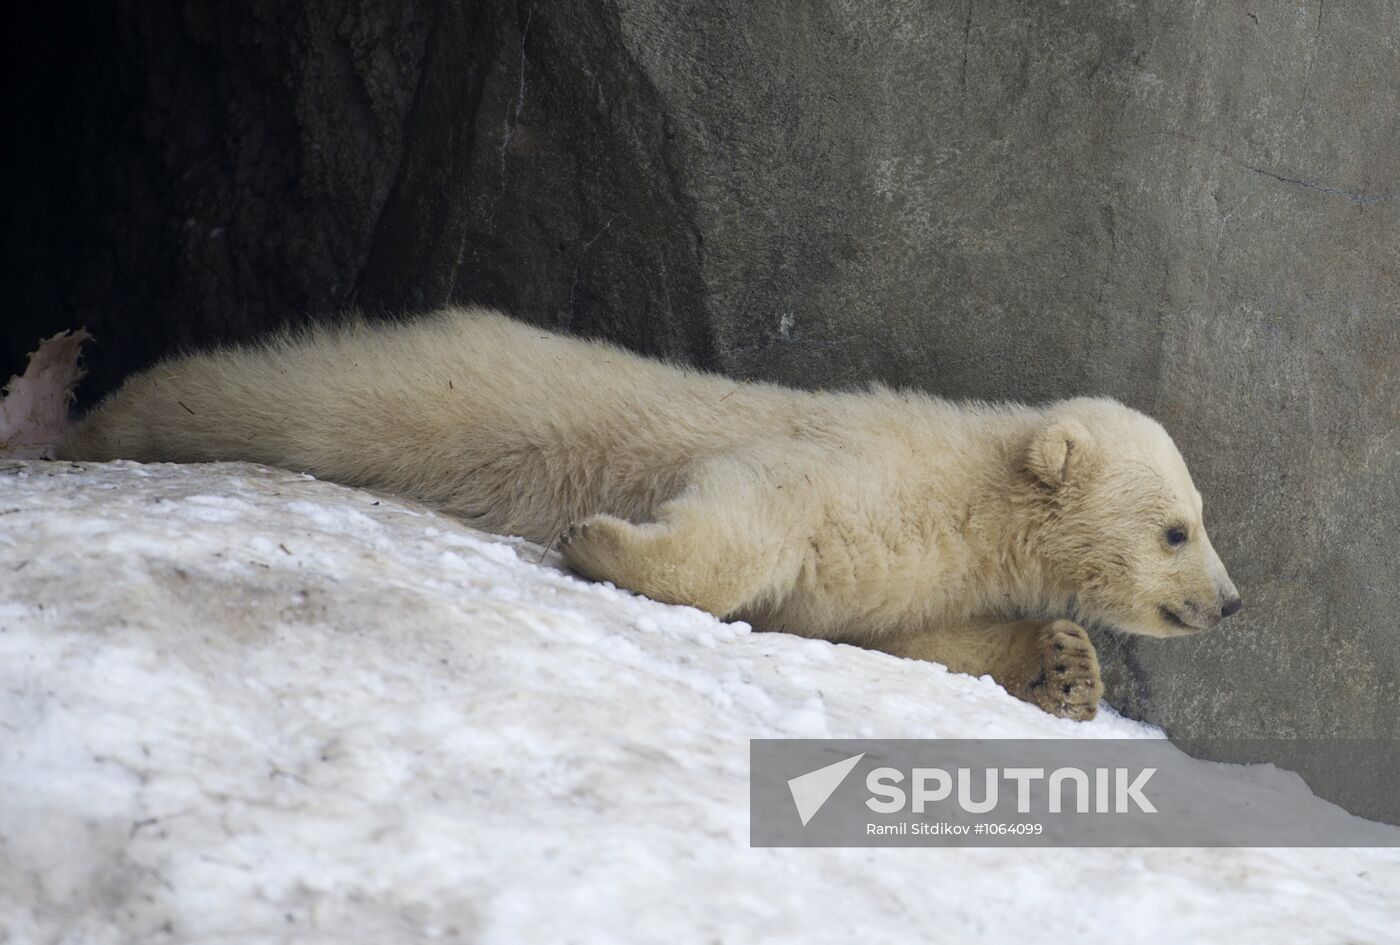 Newborn white bear cubs at Moscow Zoo.